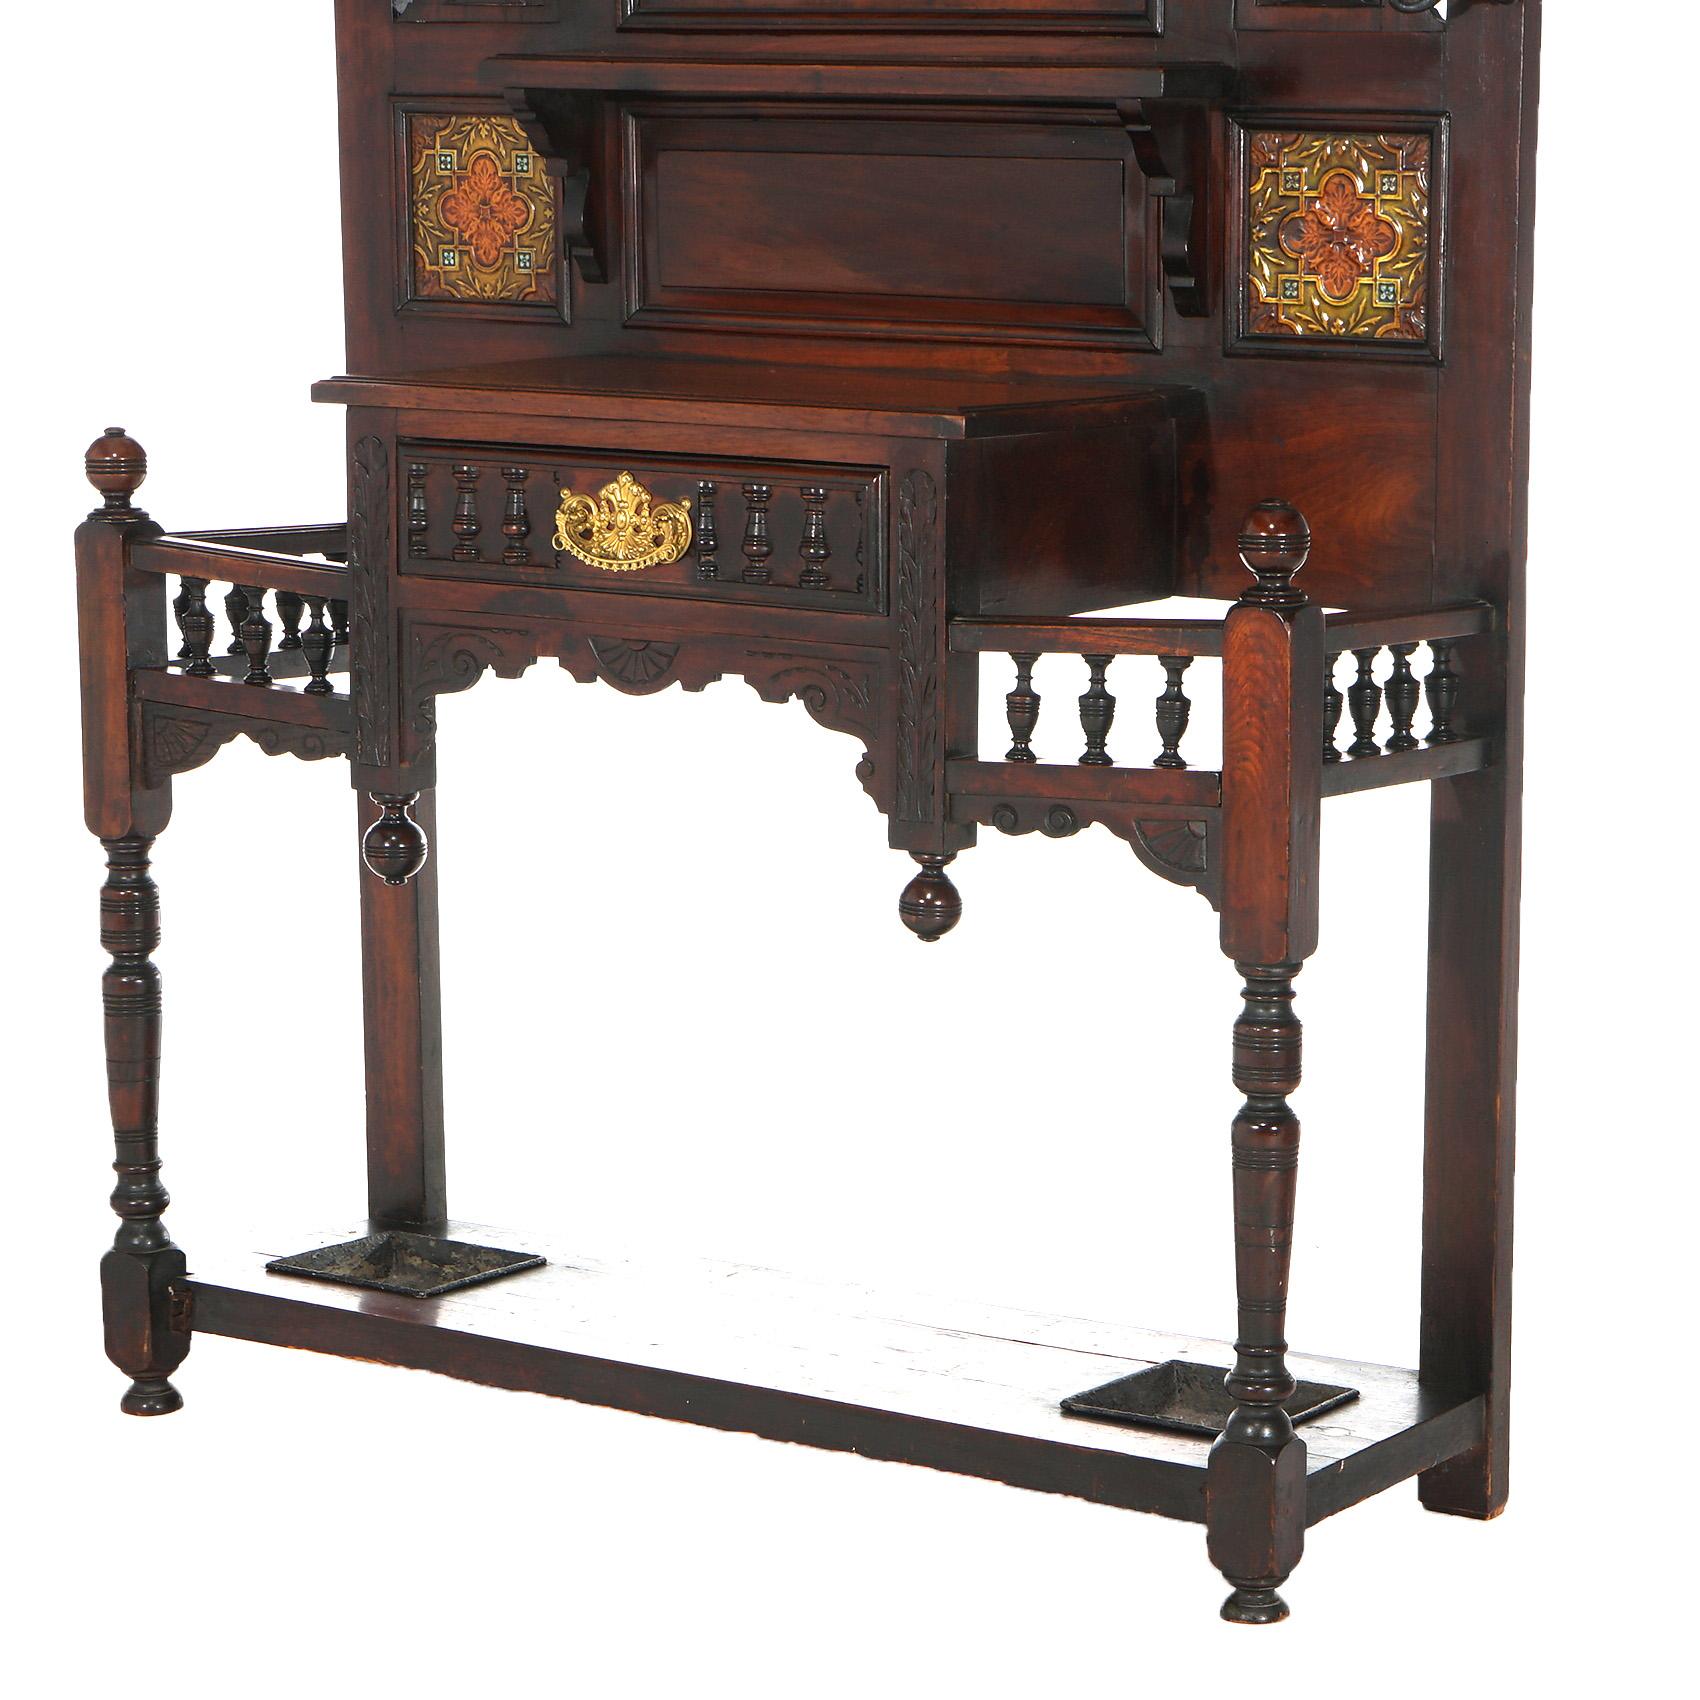 ***Ask About Reduced In-House Delivery Rates - Reliable Professional Service & Fully Insured***
Antique Carved Mahogany Hall Tree with Decorative Embossed Ceramic Tile, Shield Form Mirror and Flanking Spindled Umbrella Rails, C1900

Measures - 83